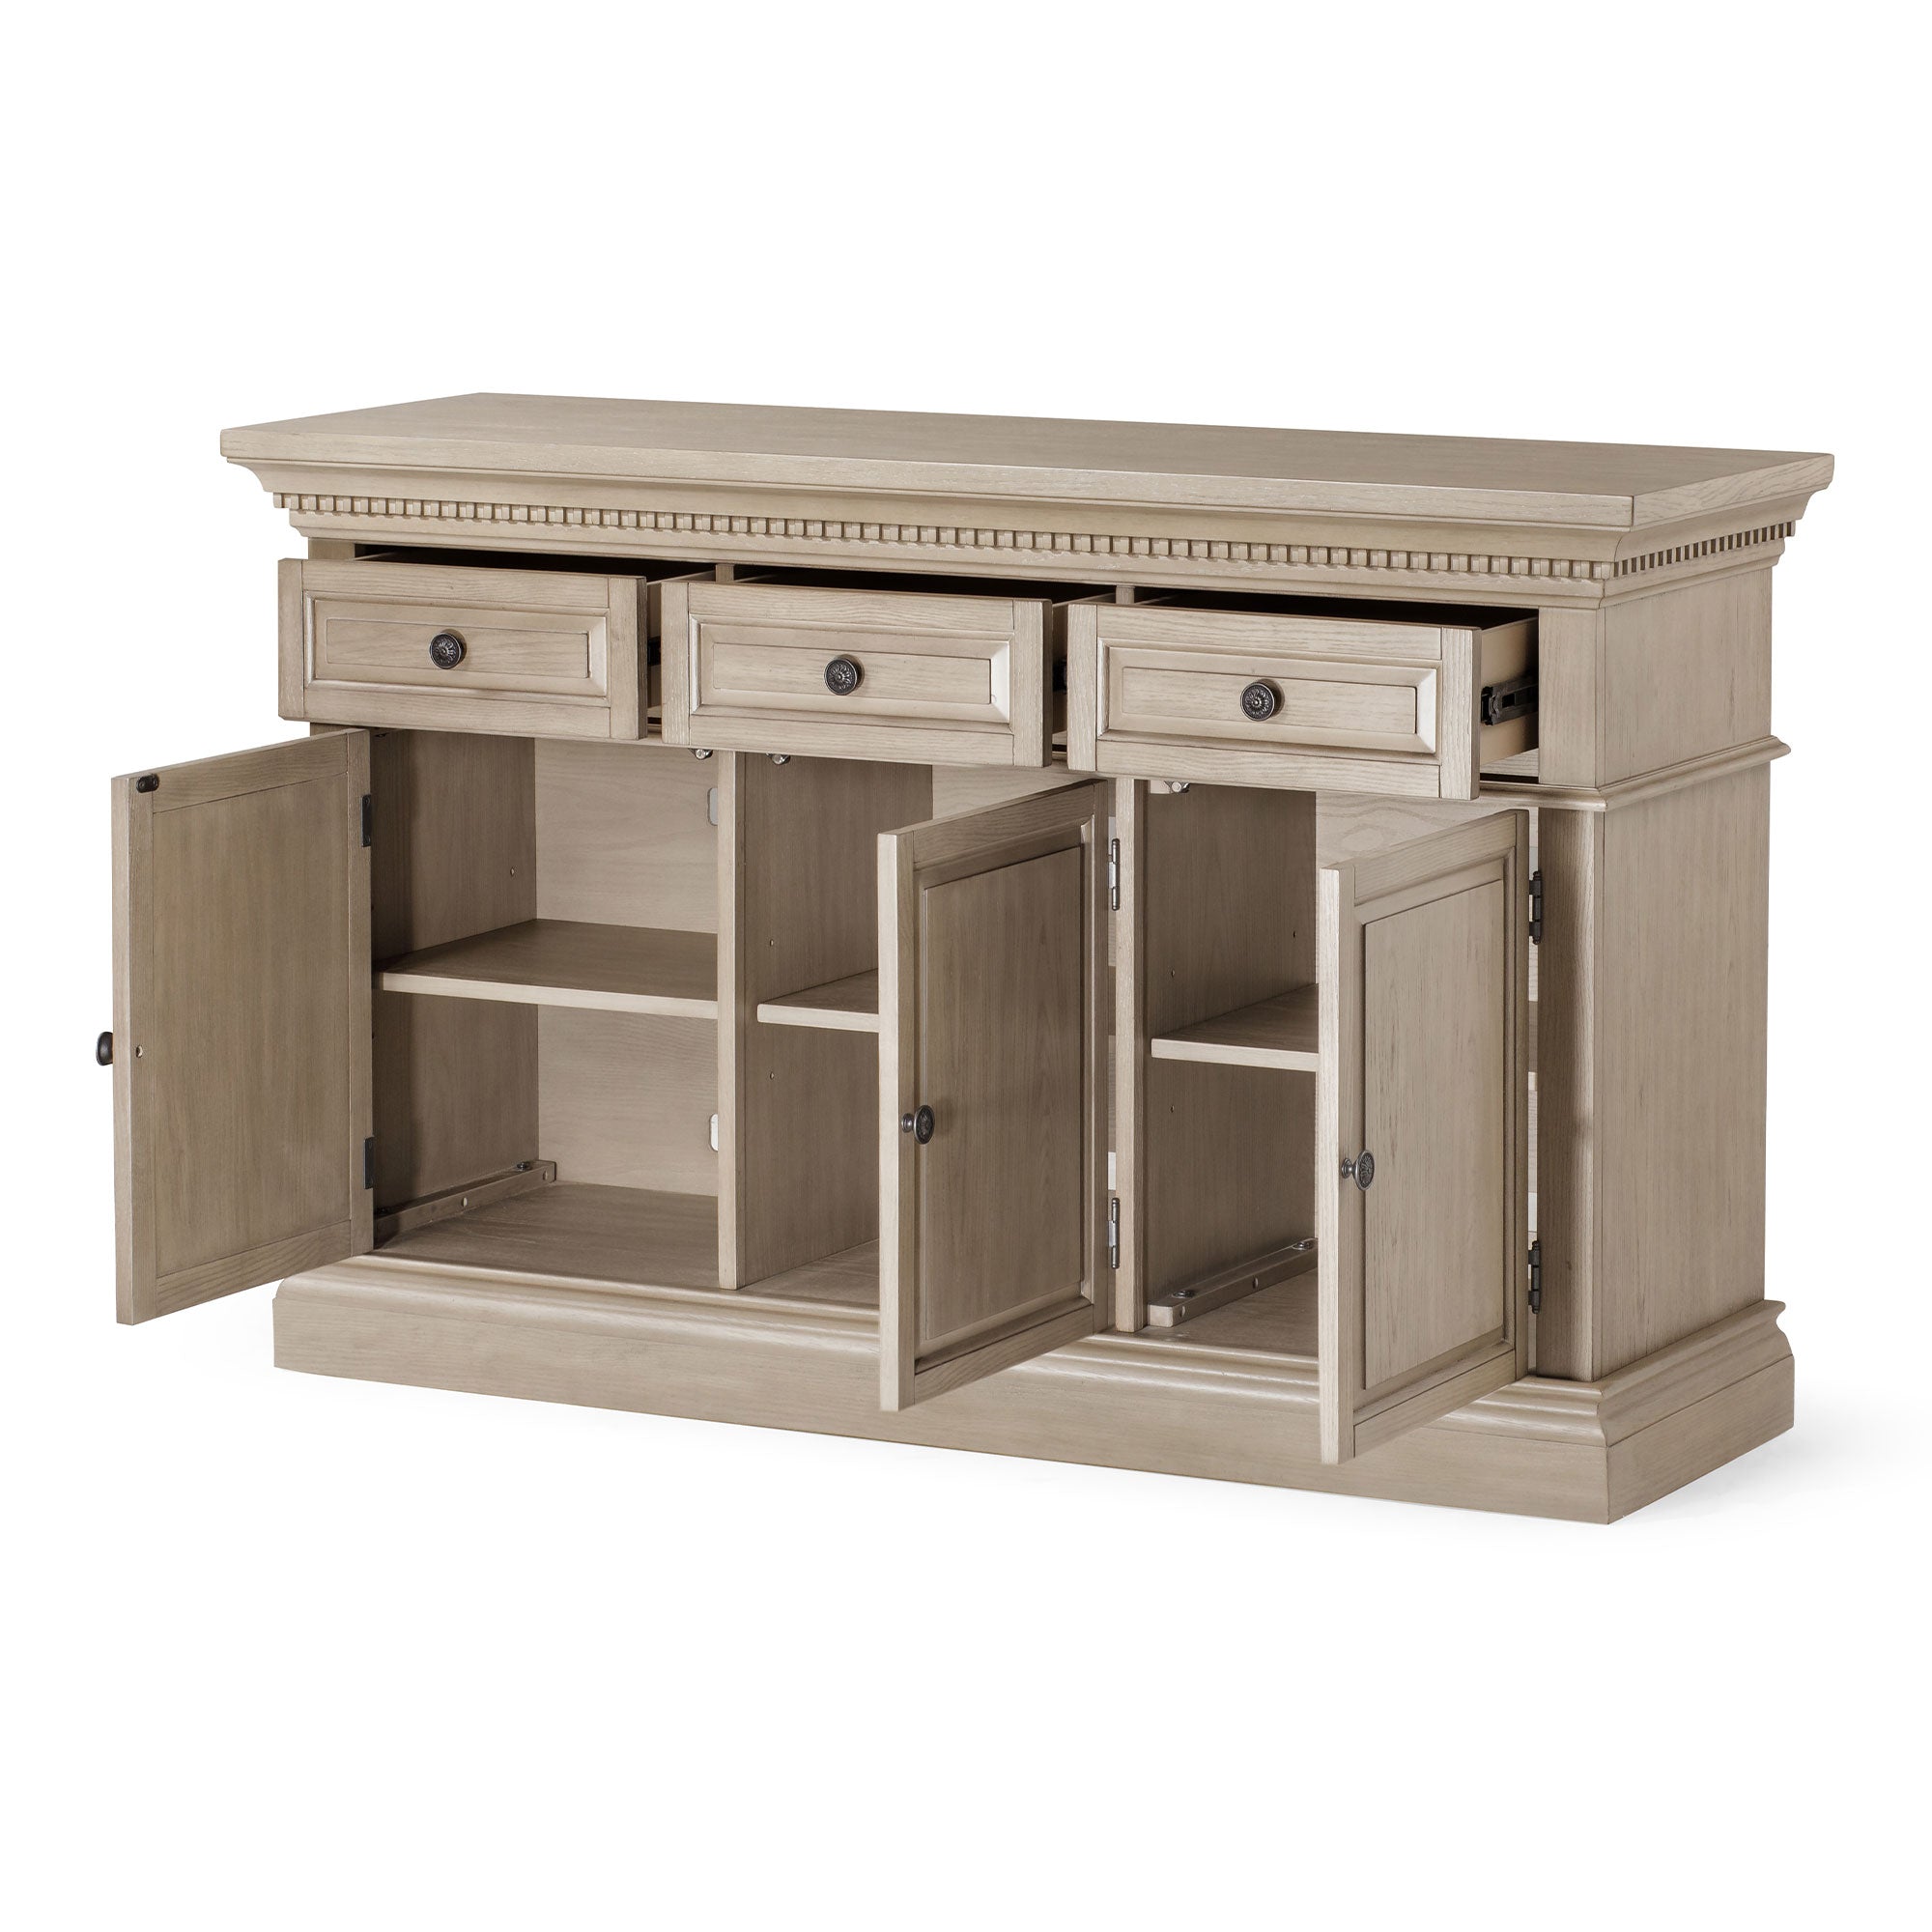 Theo Classical Wooden Sideboard in Antiqued Grey Finish in Cabinets by Maven Lane